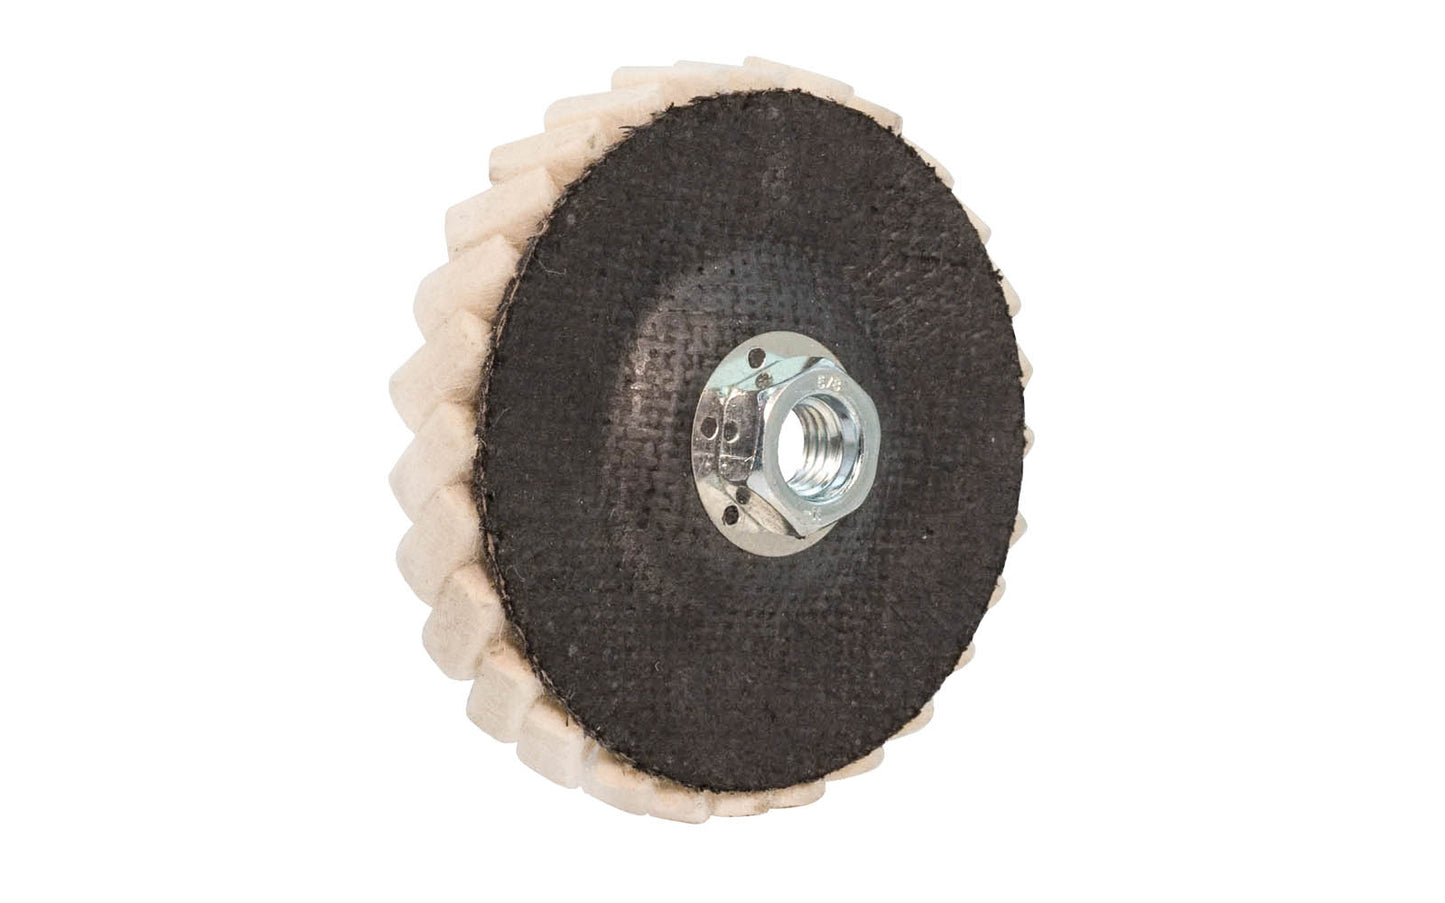 USA-made 4-1/2" buffing felt flap disc by Dico Polishing. This felt flap polishing disc is designed for final polishing of metals. Good for stainless steel, non-ferrous metals, aluminum, & stone, etc. Medium density felt with 5/8-11 Female Thread. Reinforced fiberglass backer pad.  Made in the USA. 082123735021